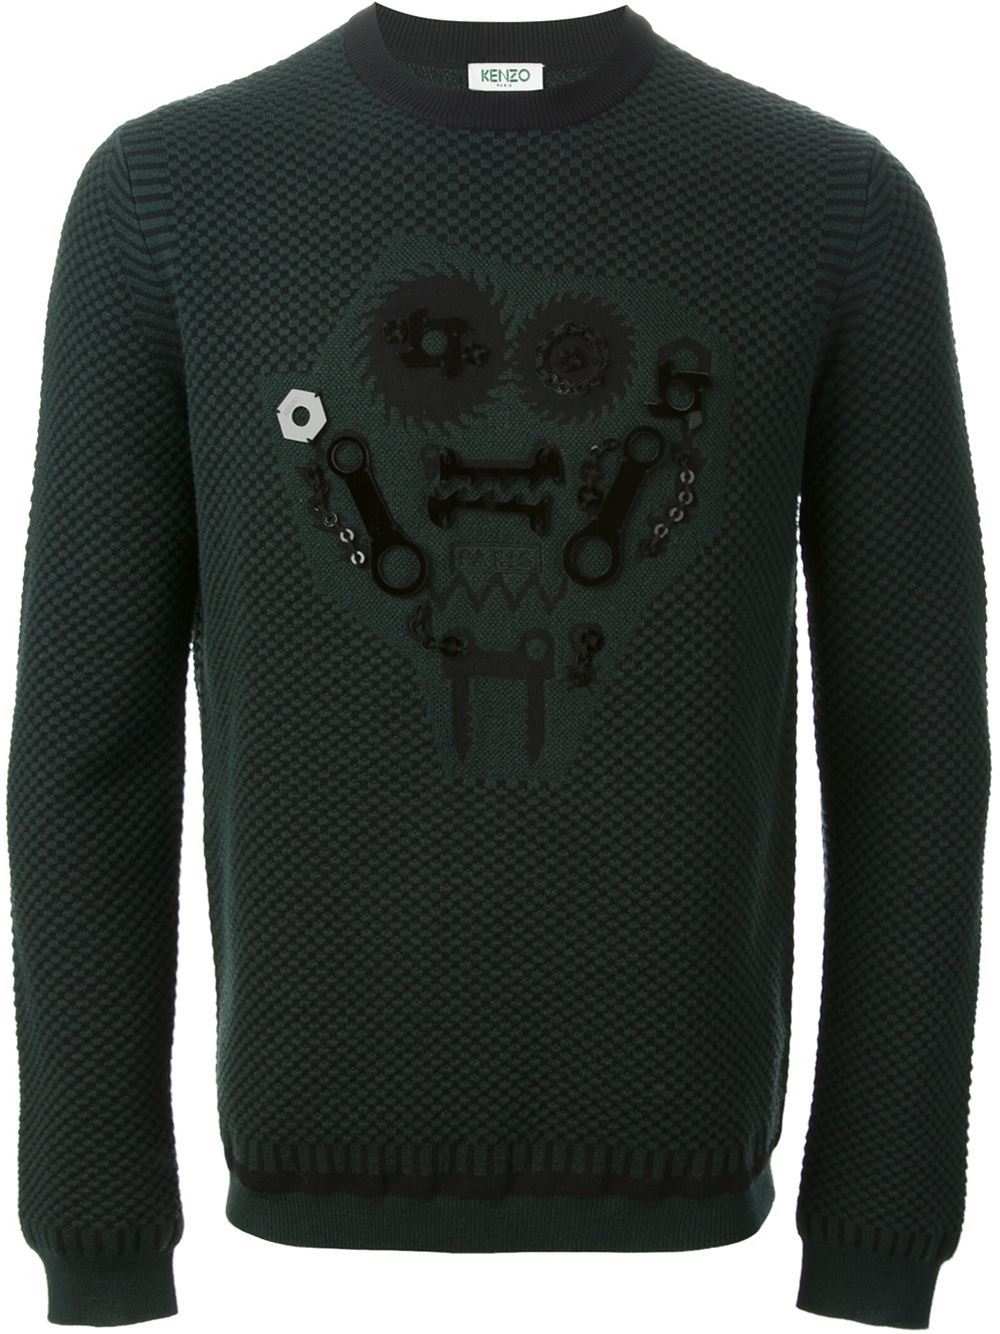 Lyst - Kenzo Monster Tools Sweater in Green for Men